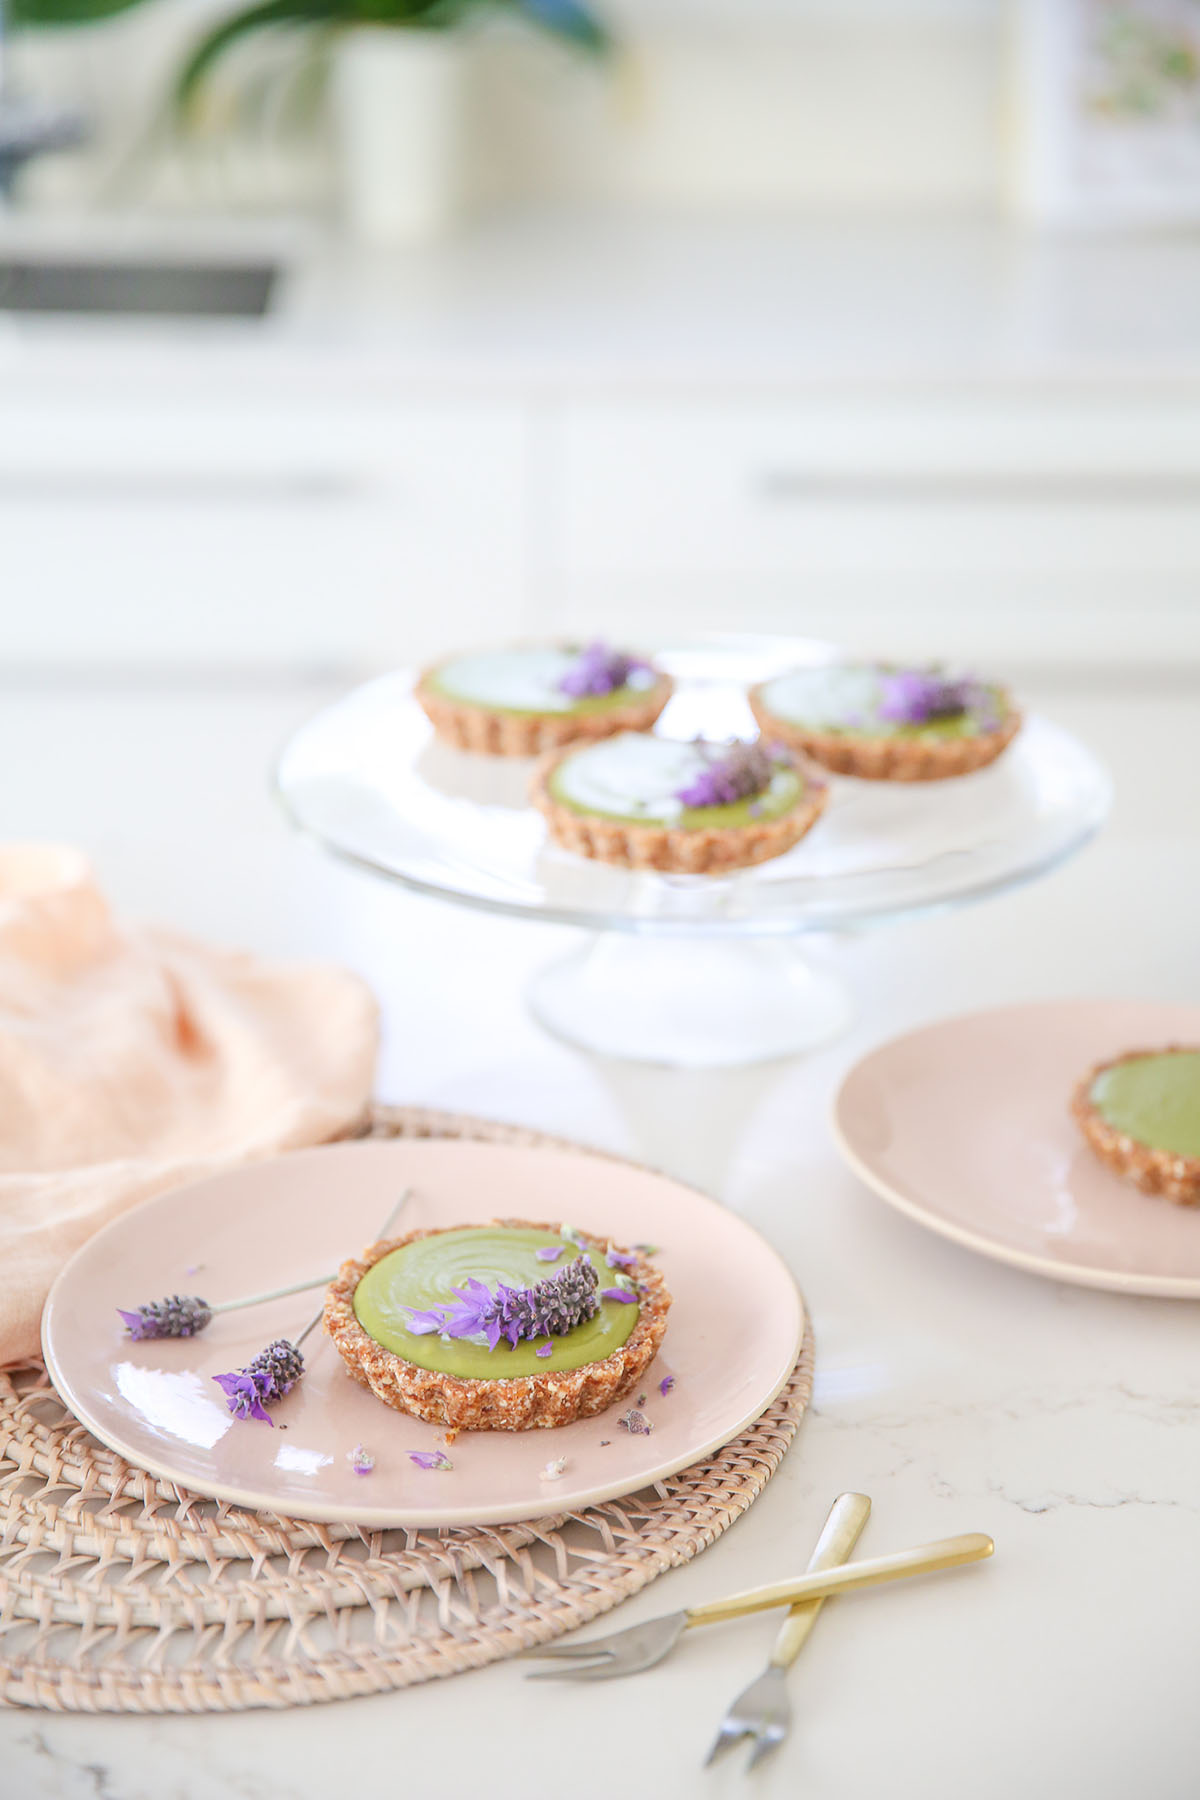 These gorgeously fragrant tarts combine the antioxidant goodness of matcha, with gloriously floral lavender. Don’t knock it til you try it, this is a partnership made in taste bud HEAVEN! Vegan, gluten + dairy free.